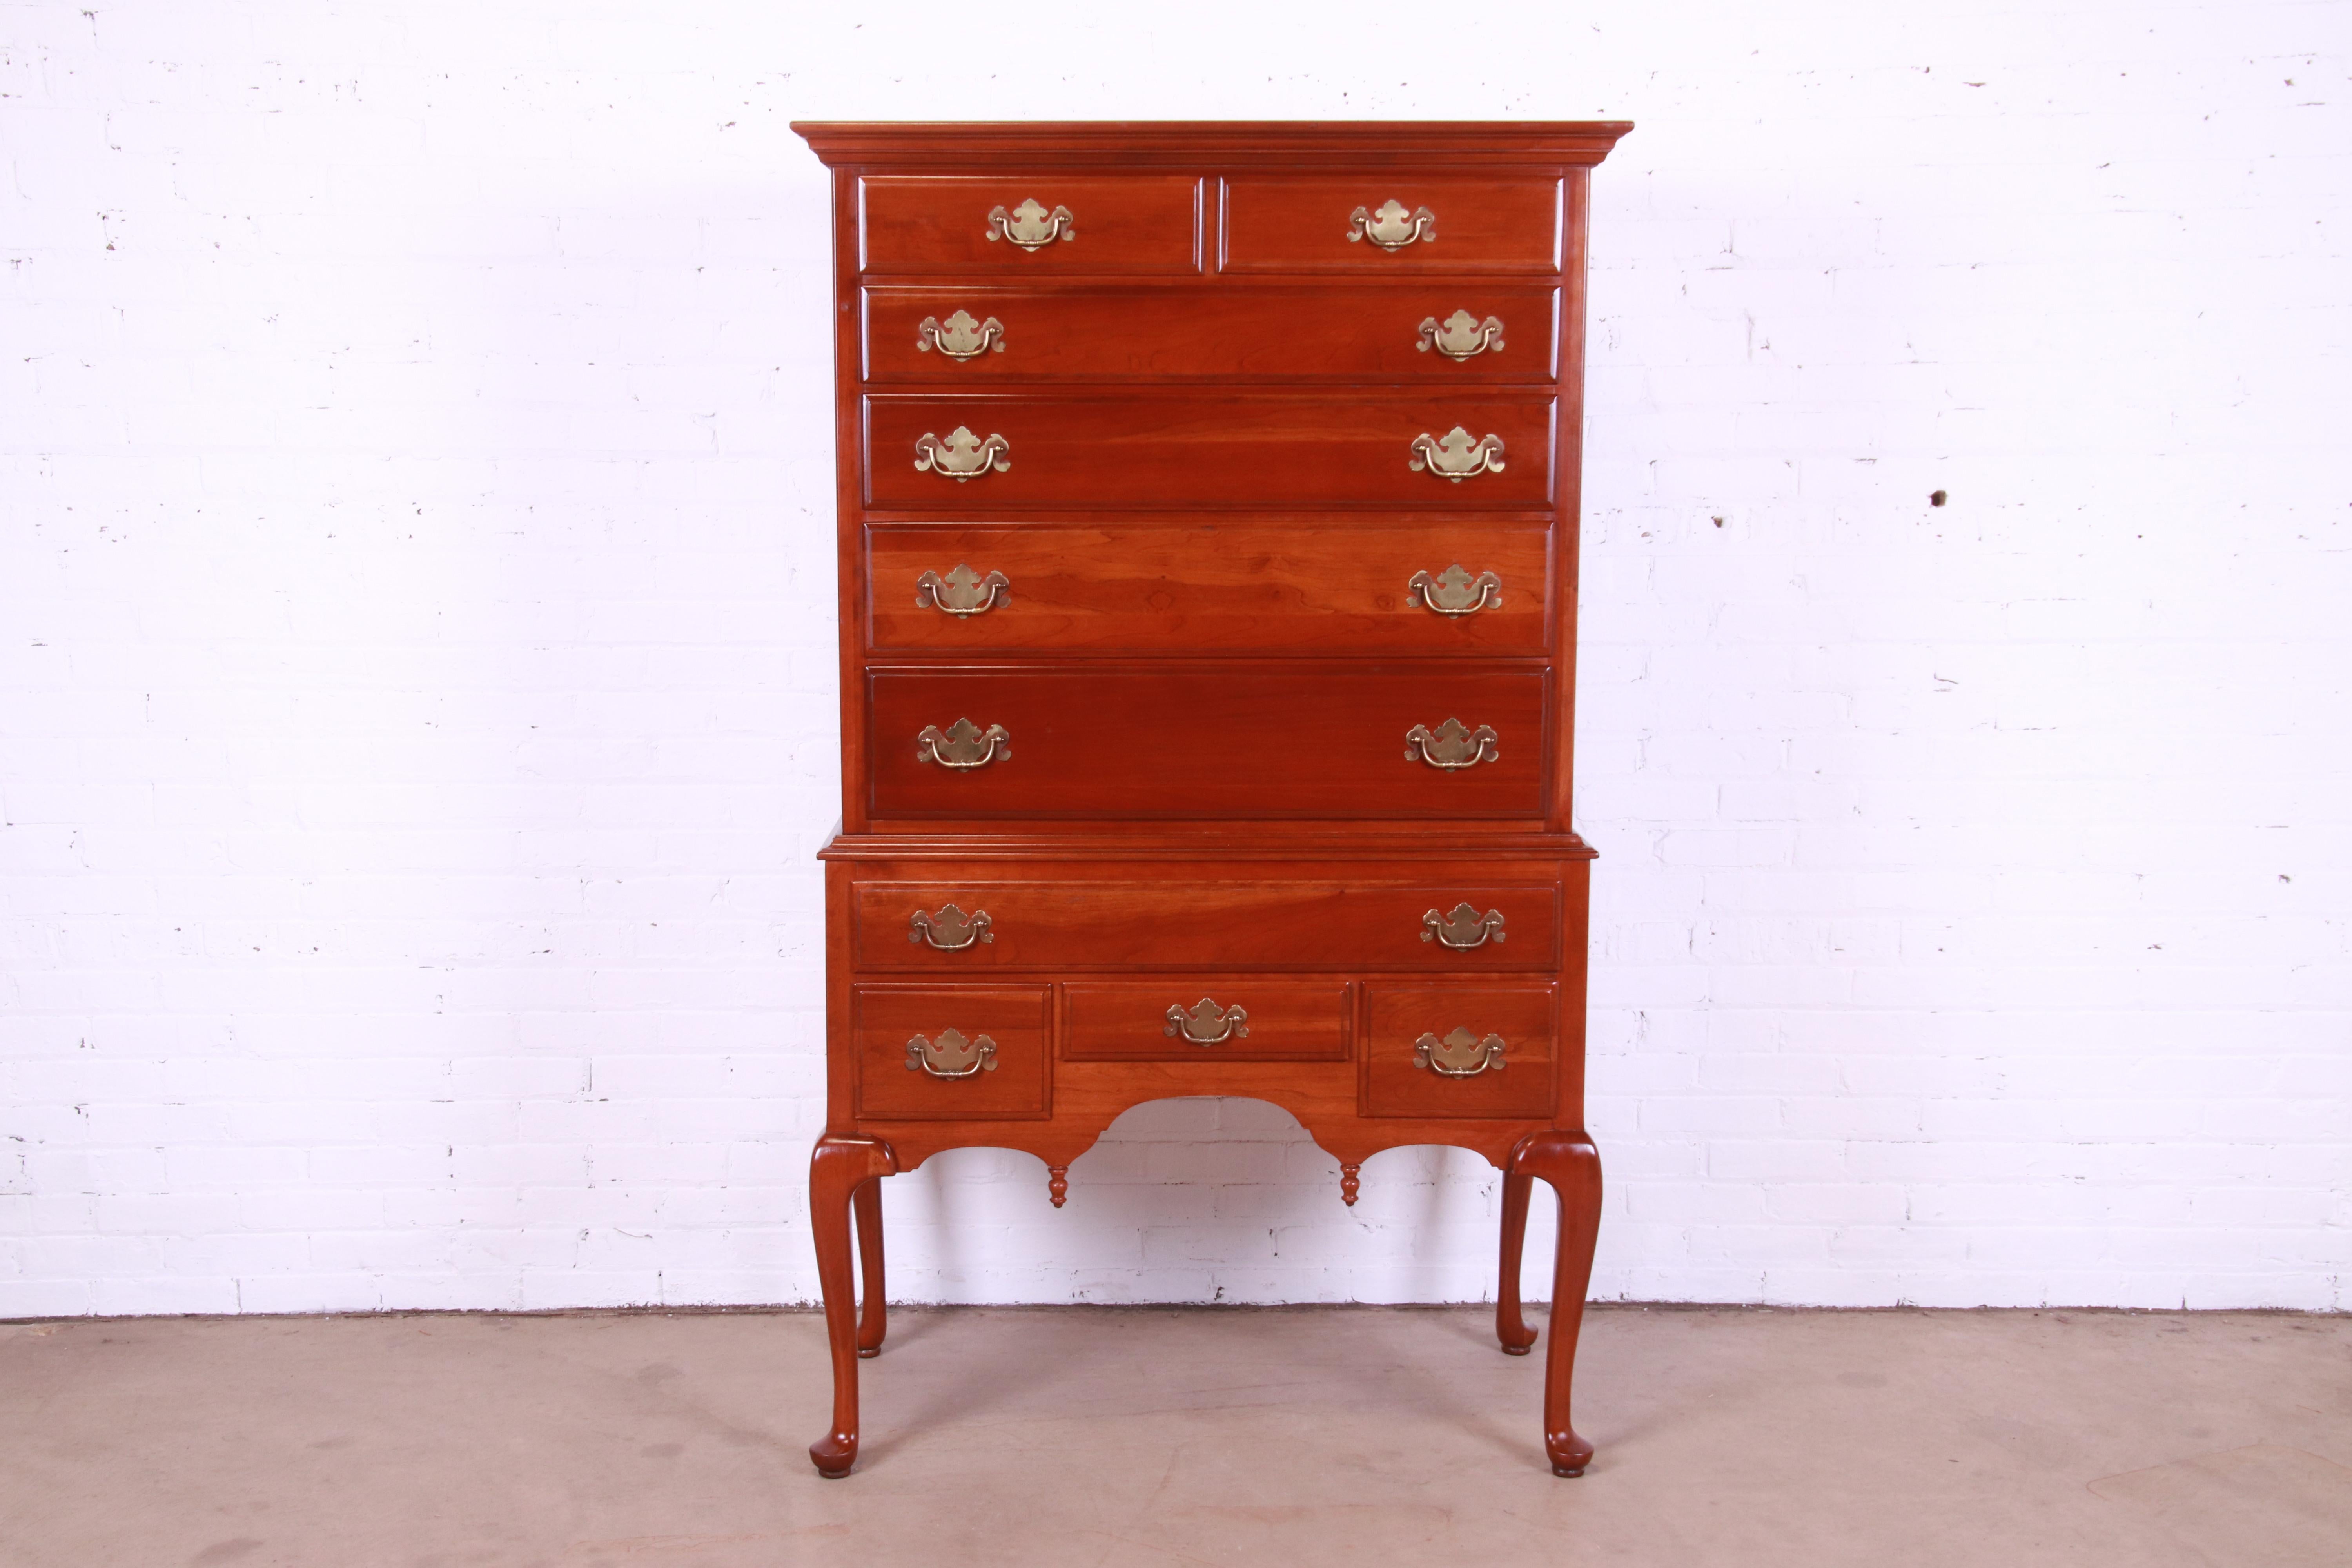 ethan allen early american furniture